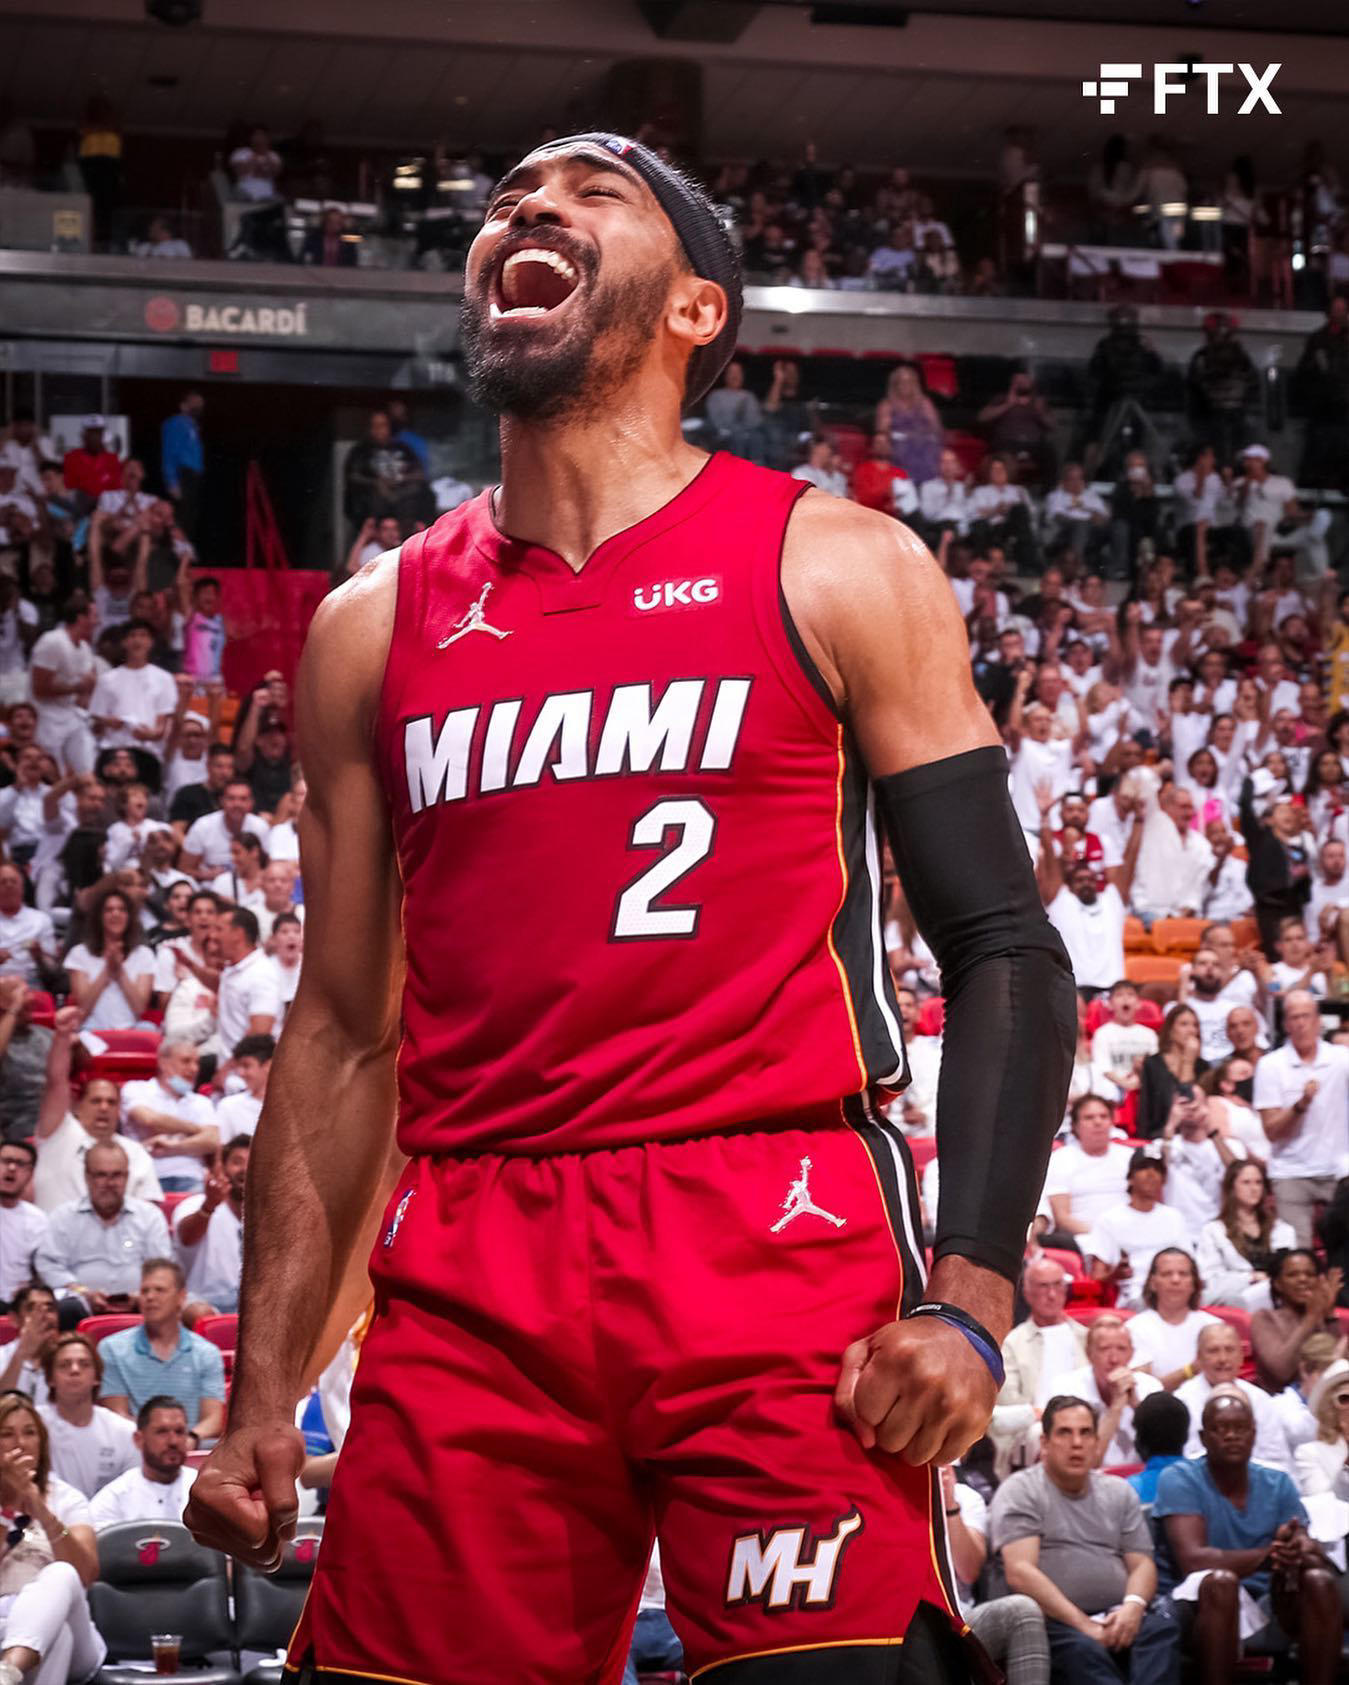 Miami HEAT - Only 2 more days